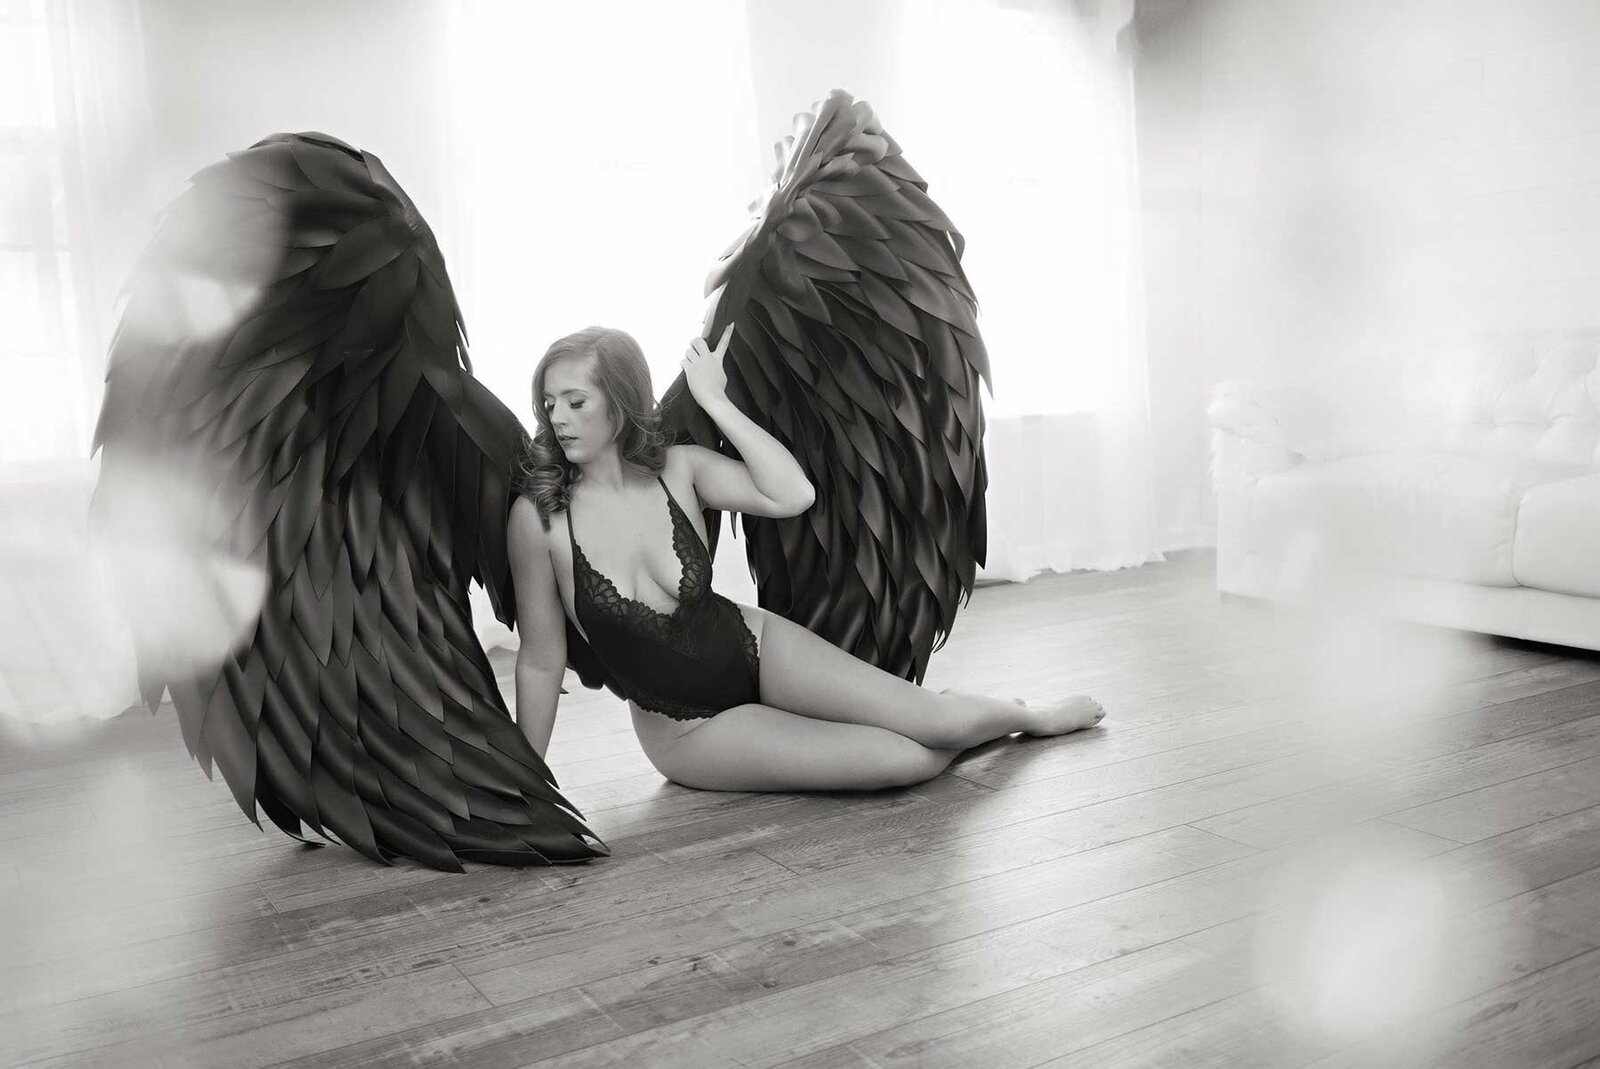 delaware-boudoir-wings-prop-session-photography